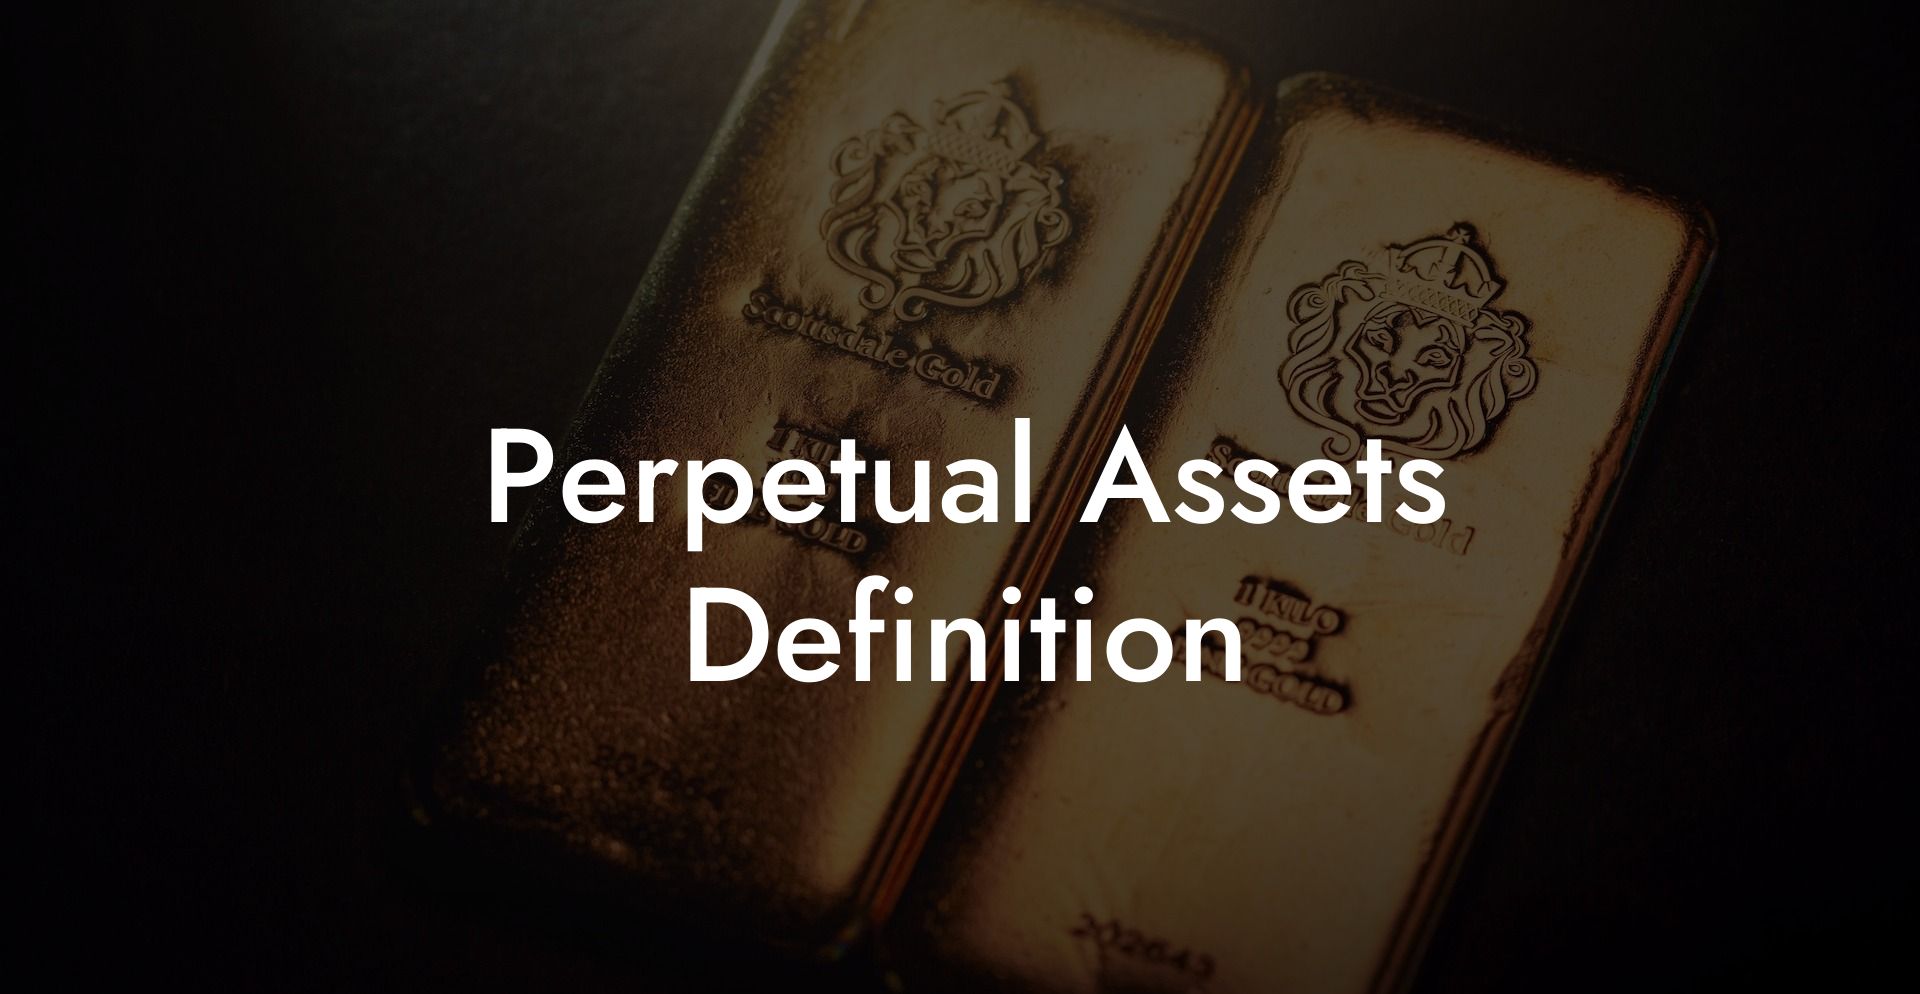 Perpetual Assets Definition